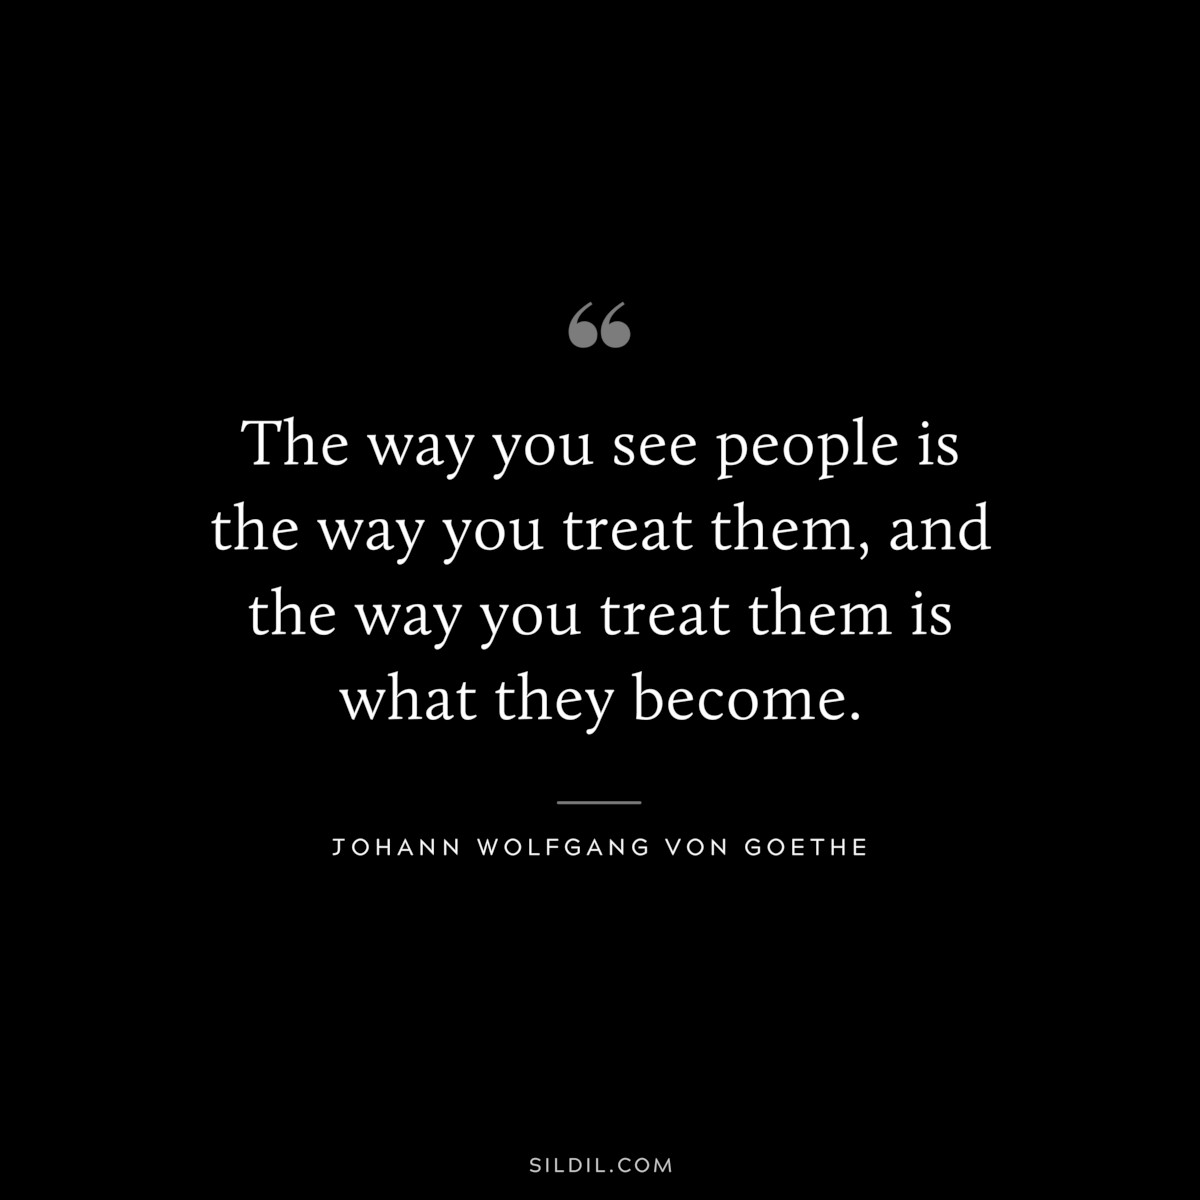 The way you see people is the way you treat them, and the way you treat them is what they become.― Johann Wolfgang von Goethe